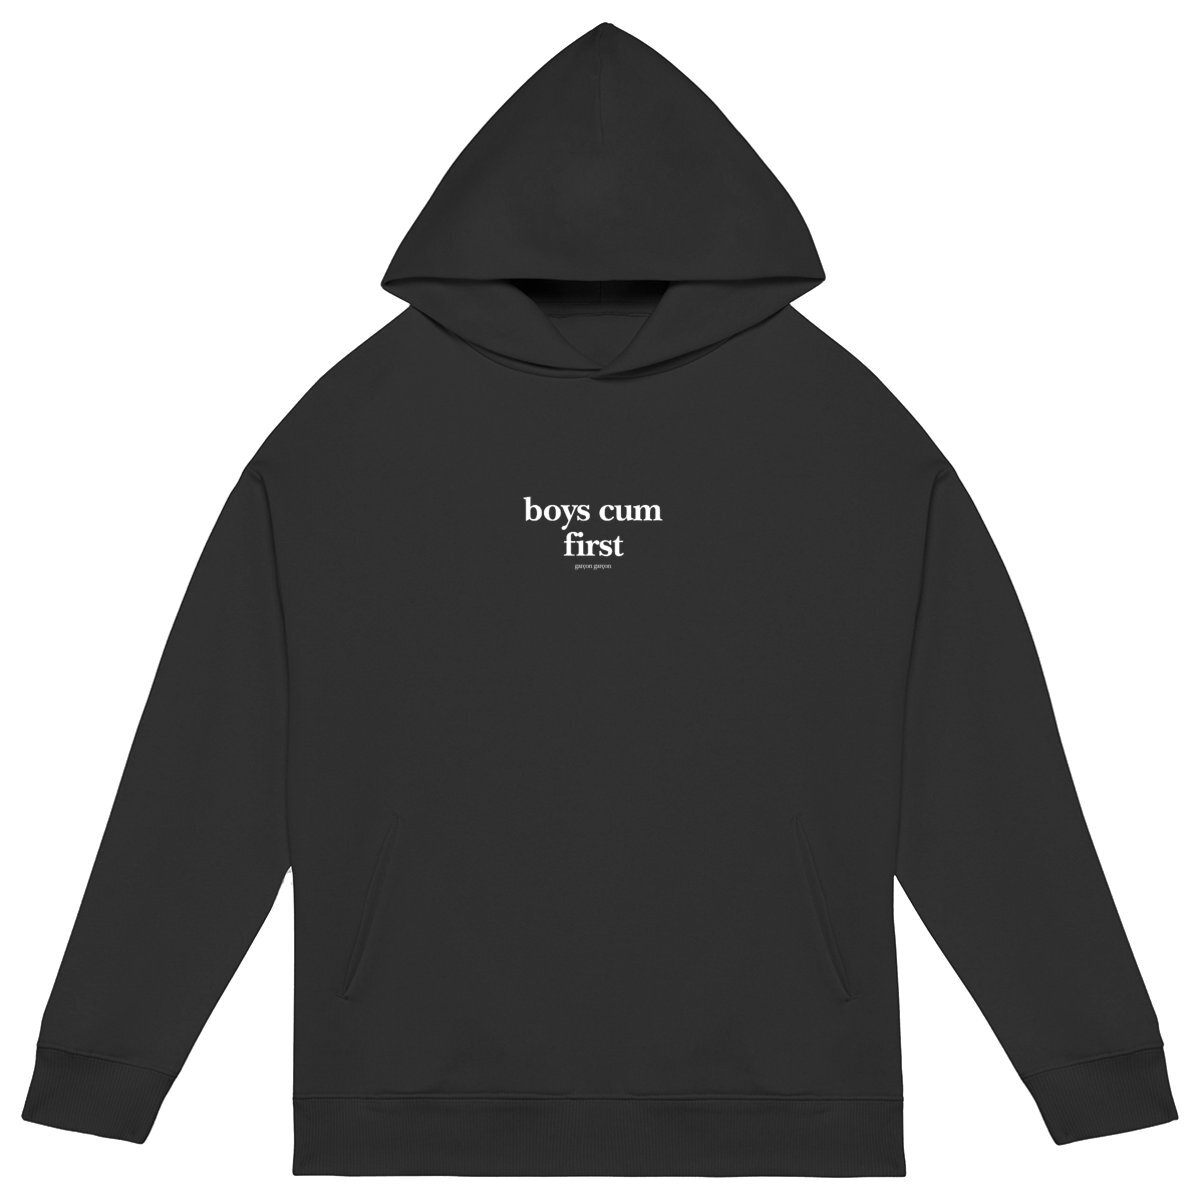 boys cum first hoodie oversized. garçon garçon essentiel oversized hoodie. Sleek in black and whispering Parisian chic, this hoodie is the sartorial whisper of 'garçon garçon' — a statement of understated elegance. Perfect for those who carry a piece of Paris in their hearts and a touch of audacity on their sleeves.